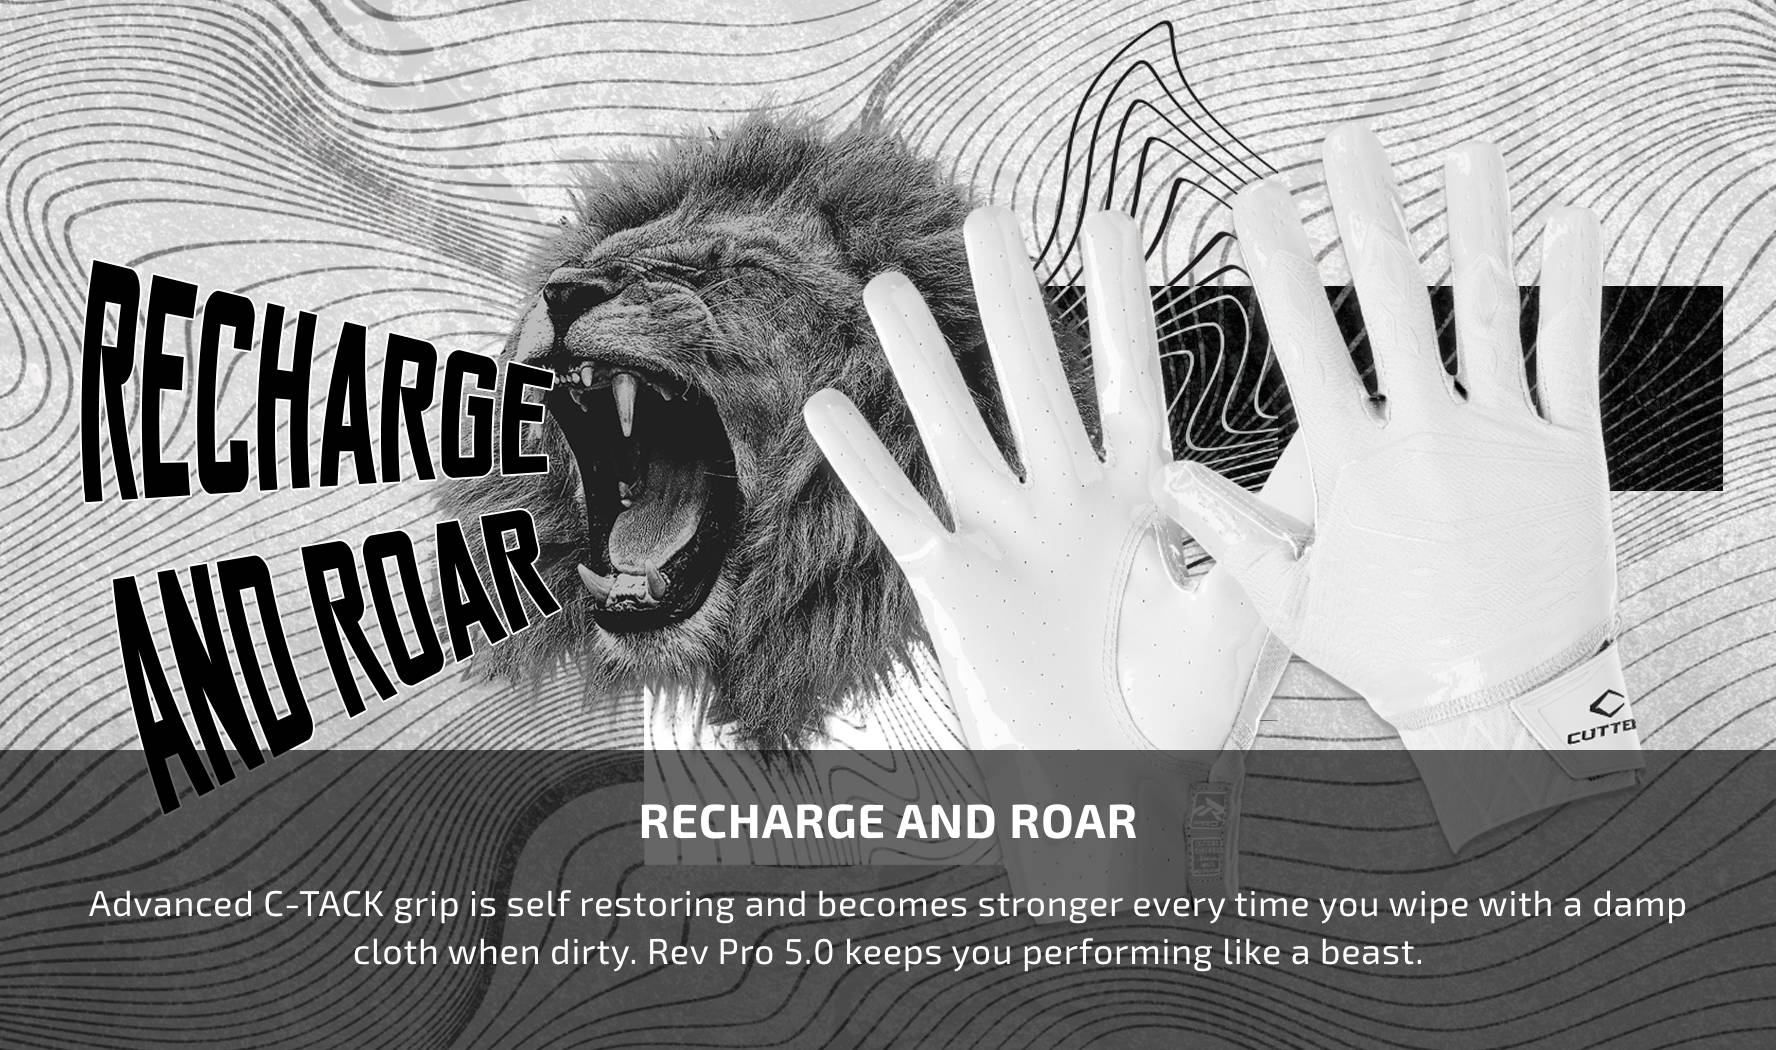 Recharge and Roar. Advanced C-TACK grip is self restoring and becomes stronger every time you wipe with a damp cloth when dirty. Rev Pro 5.0 keeps you performing like a beast. 